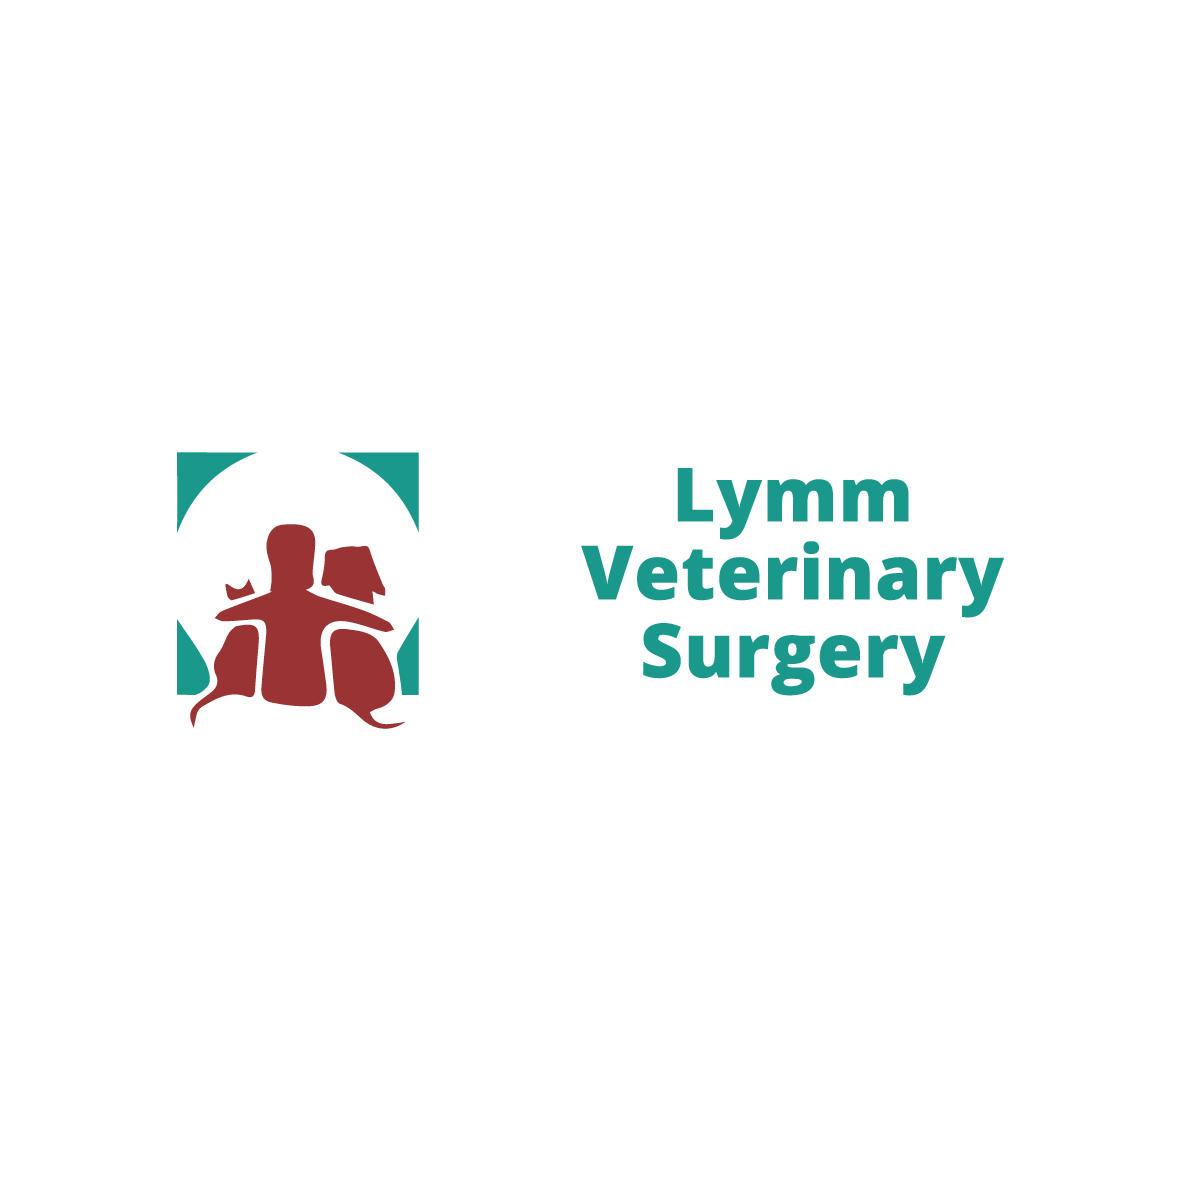 Willows Veterinary Group - Lymm Veterinary Surgery - Lymm, Cheshire WA13 0DL - 01925 752721 | ShowMeLocal.com